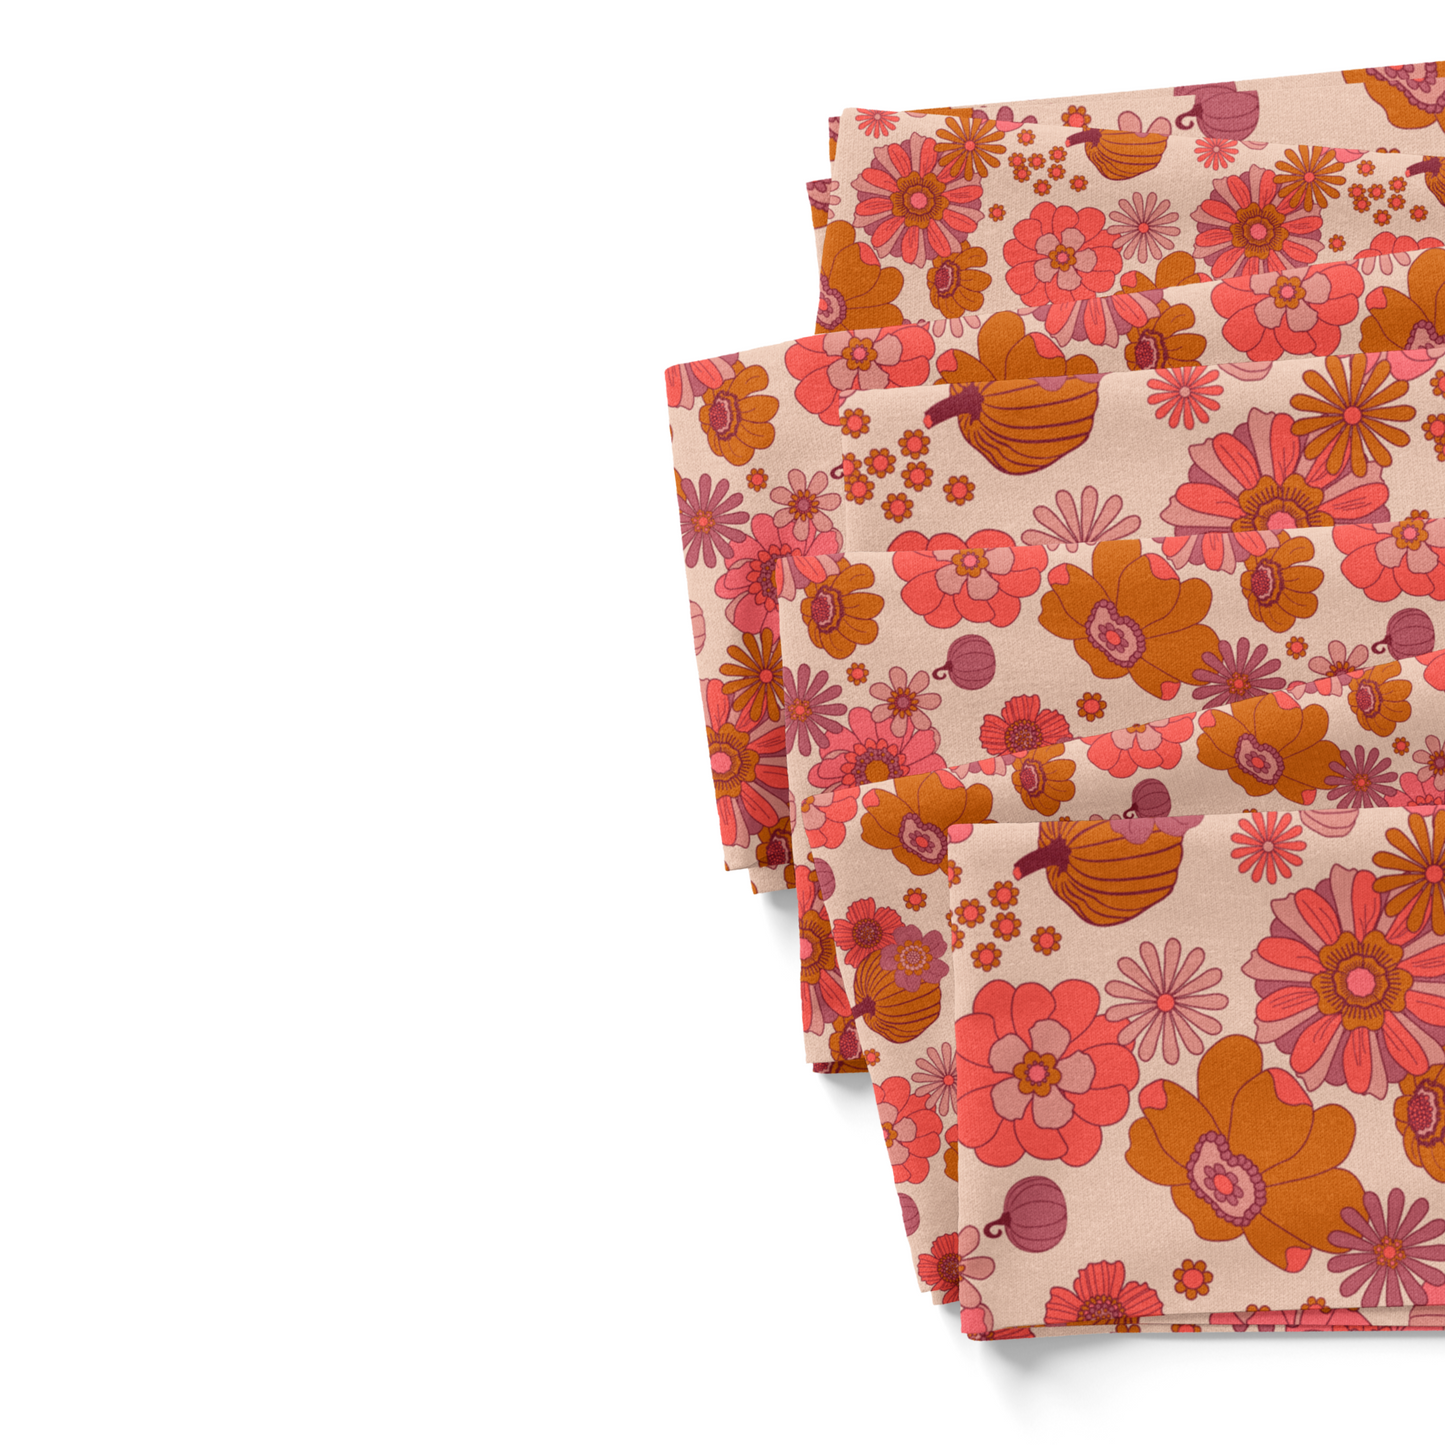 The Peachy Dot "Harvest Floral Pumpkin Patch" fabric swatches.